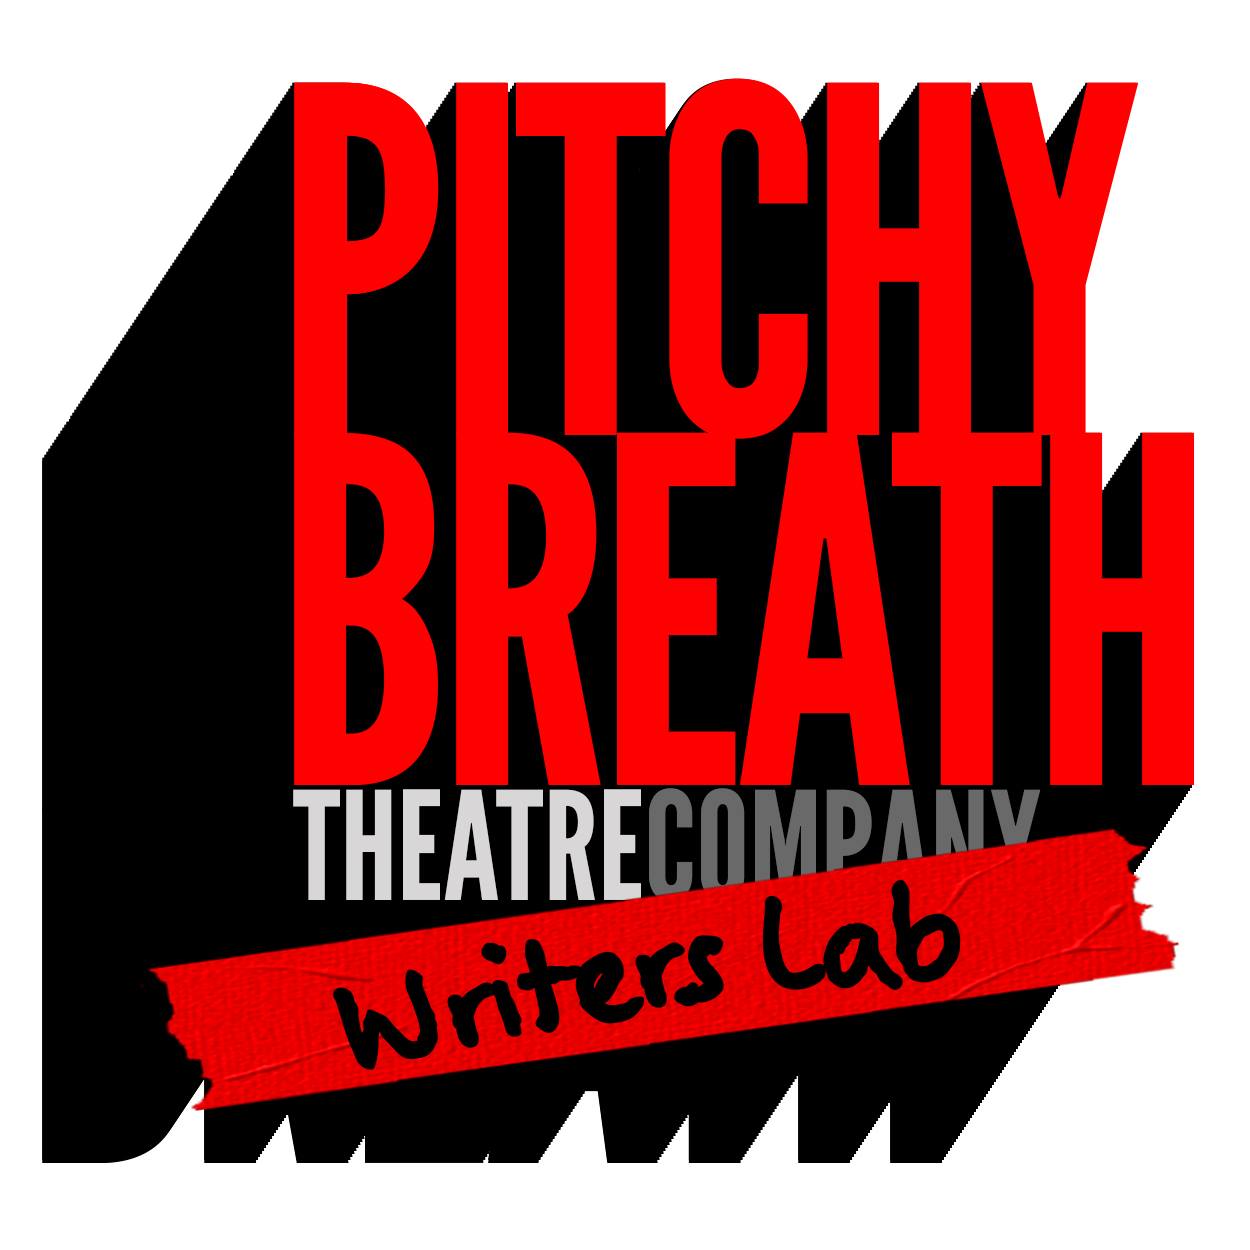 Writers Lab Pitchy Breath Theatre Company